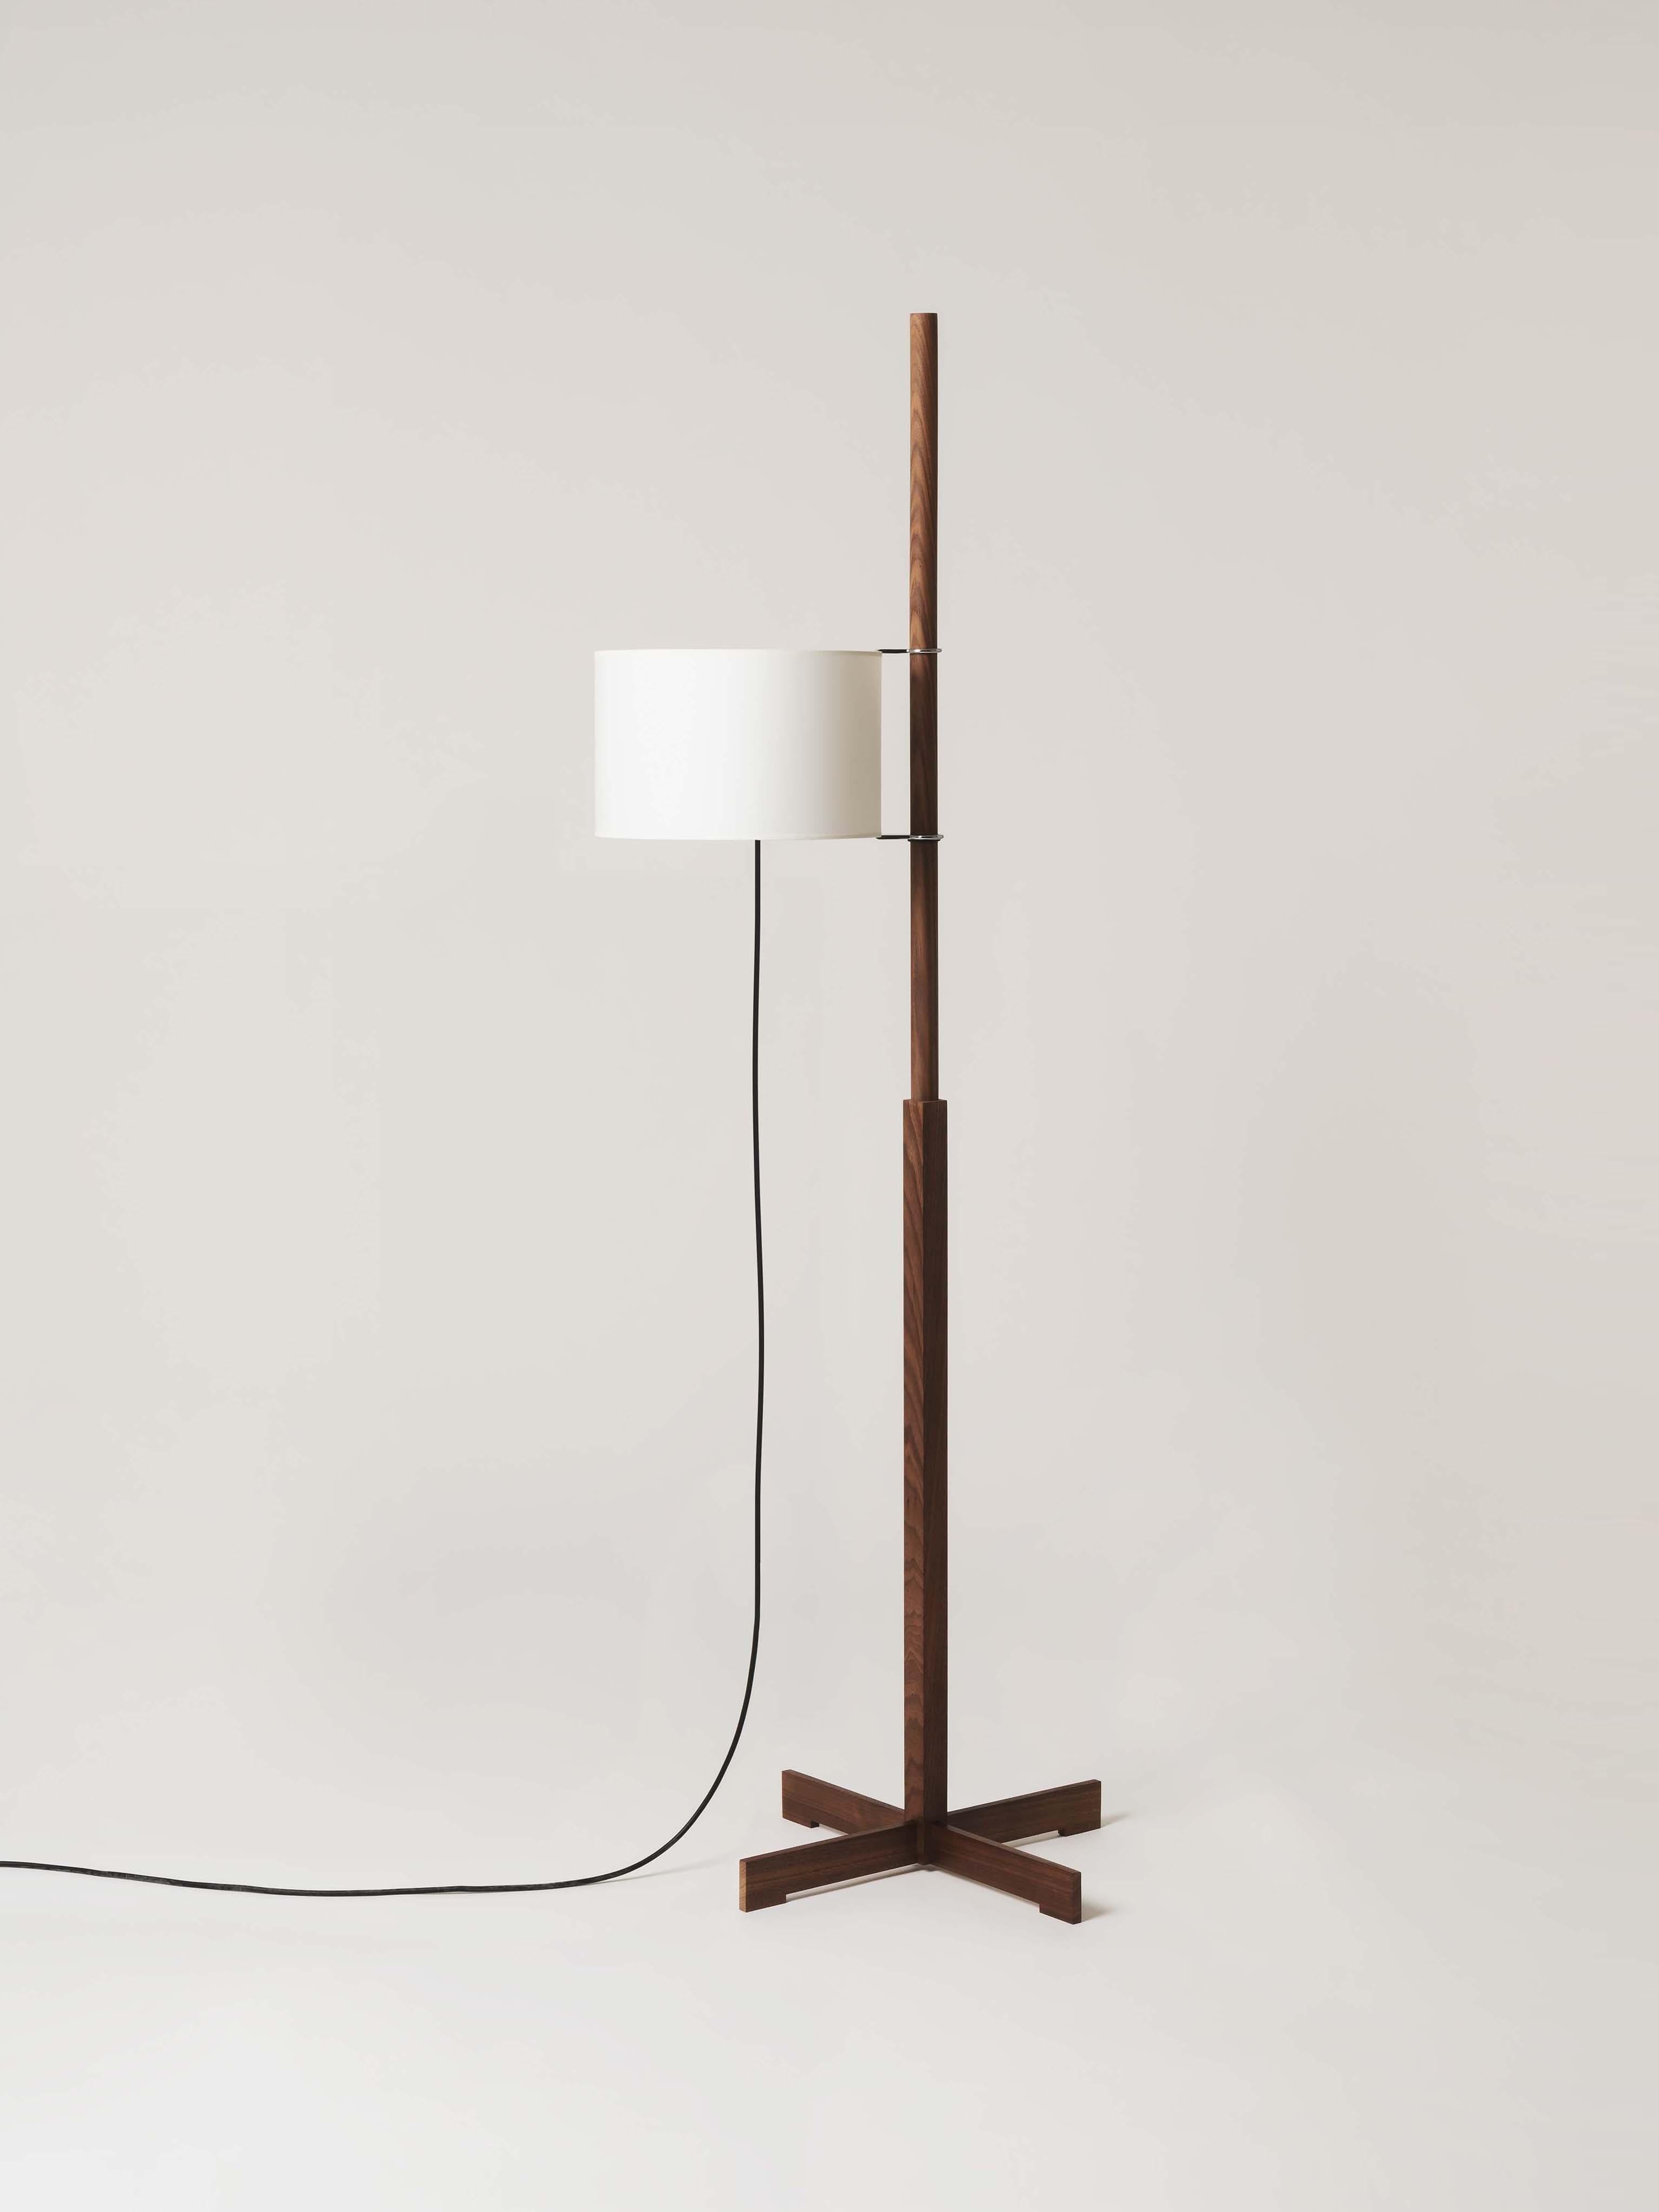 White and walnut TMM floor lamp by Miguel Milá
Dimensions: D 50 x W 60 x H 166 cm
Materials: Cherry wood, parchment lampshade.
Available in 3 lampshades: beige, white and white with diffuser.
Available in 5 woods: beech, cherry, walnut, natural